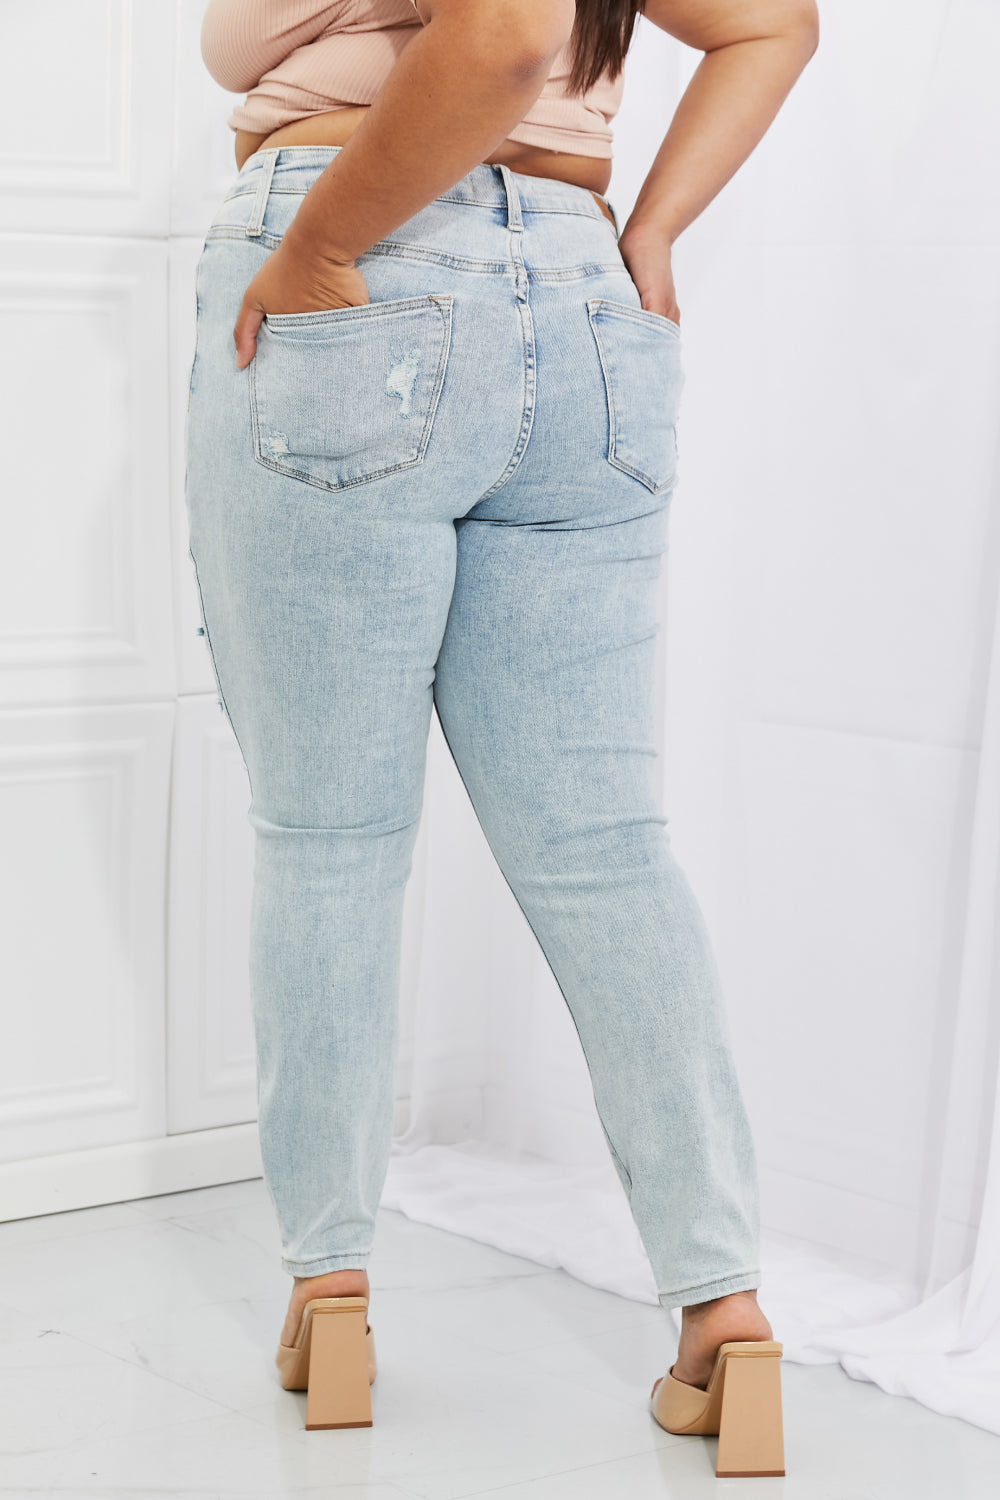 *Exclusively Online* Judy Blue Tiana High Waisted Distressed Skinny Jeans